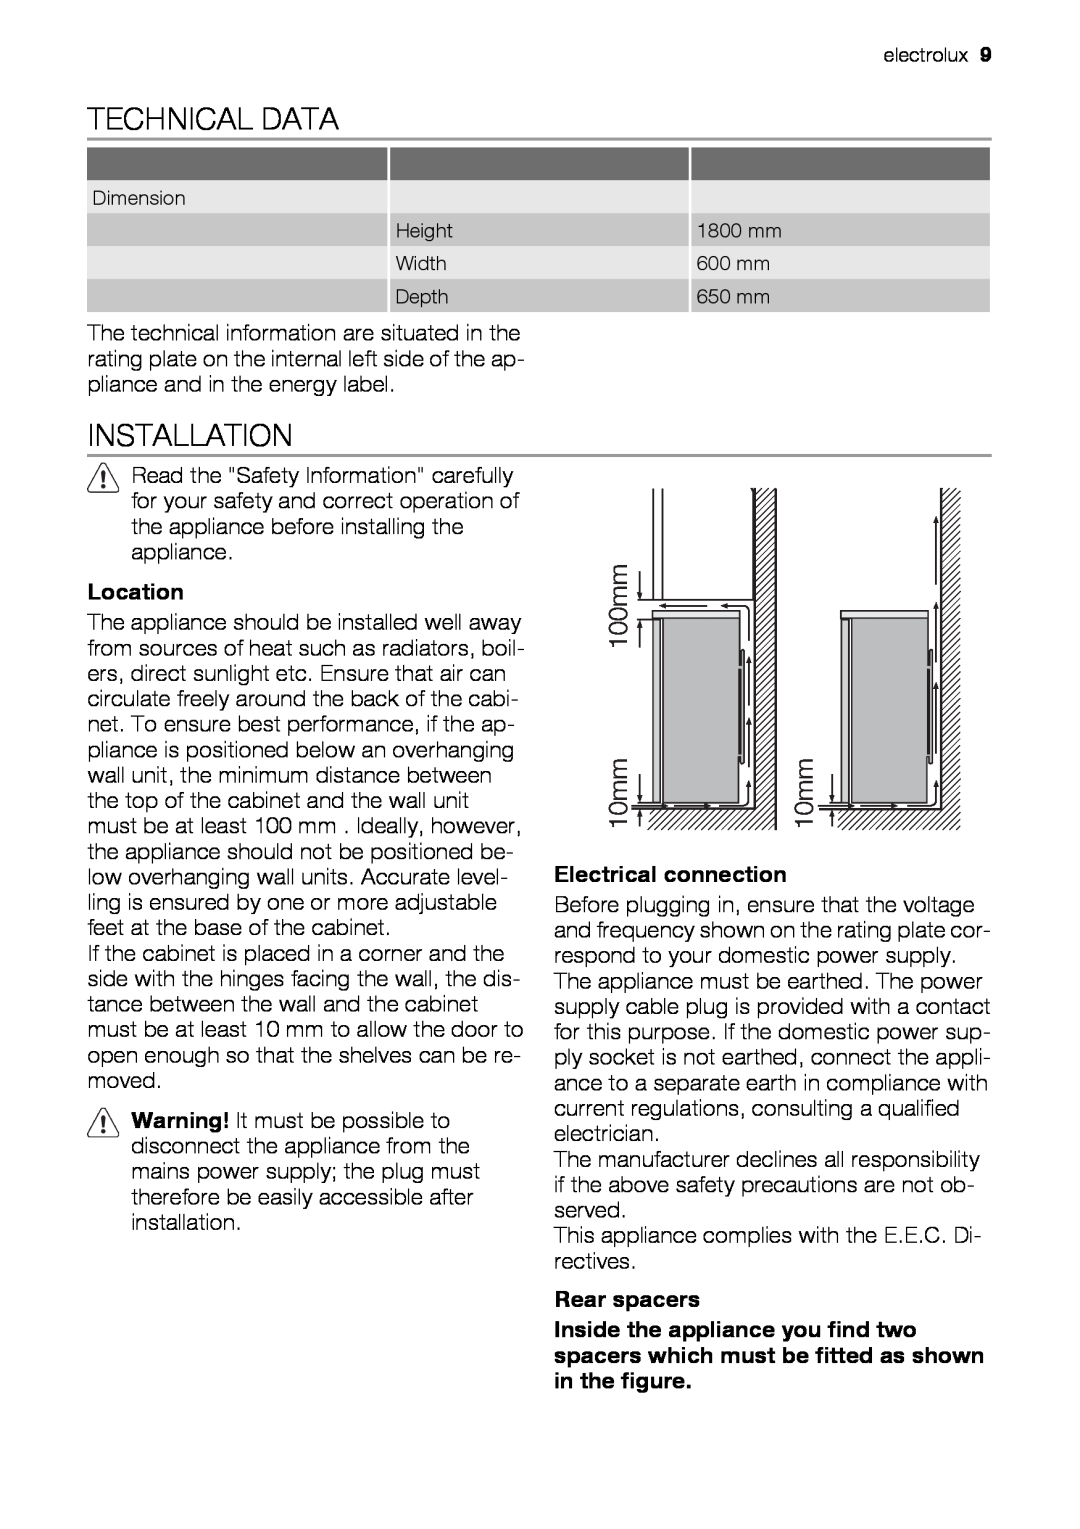 Electrolux ERC39350W user manual Technical Data, Installation, 100mm, 10mm, Location, Electrical connection, Rear spacers 